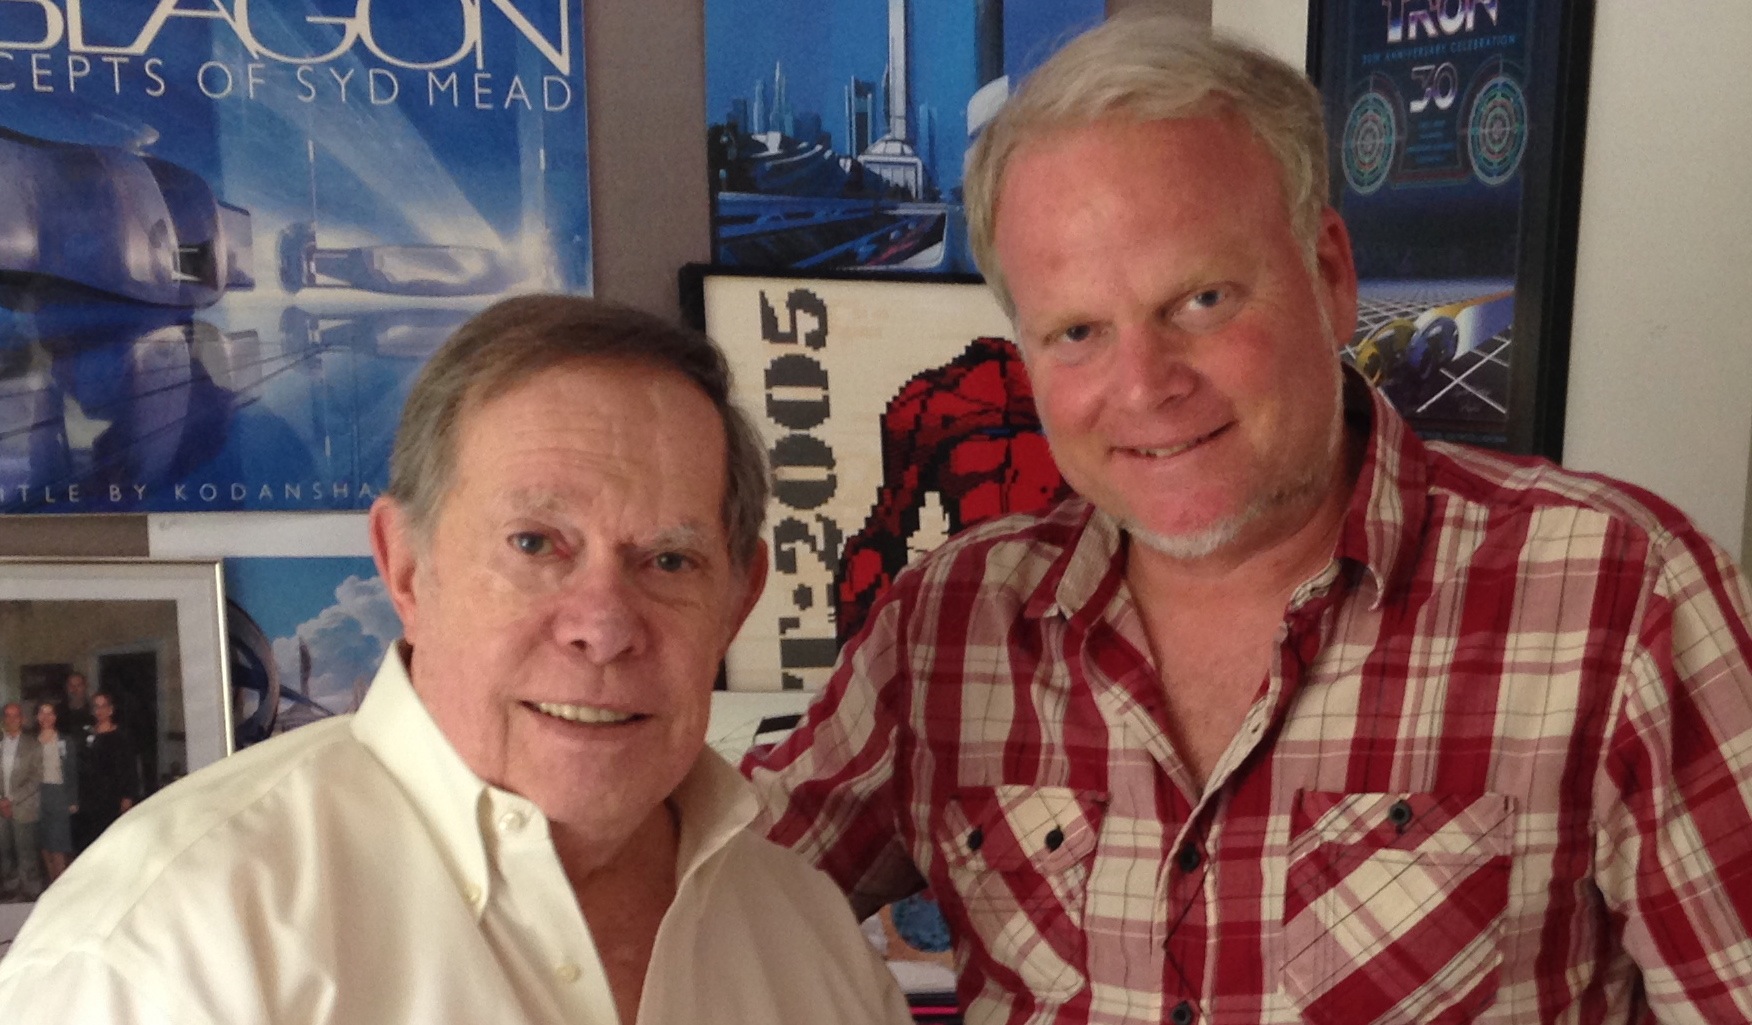 Director Danny Miller with Futurist Artist Syd Mead